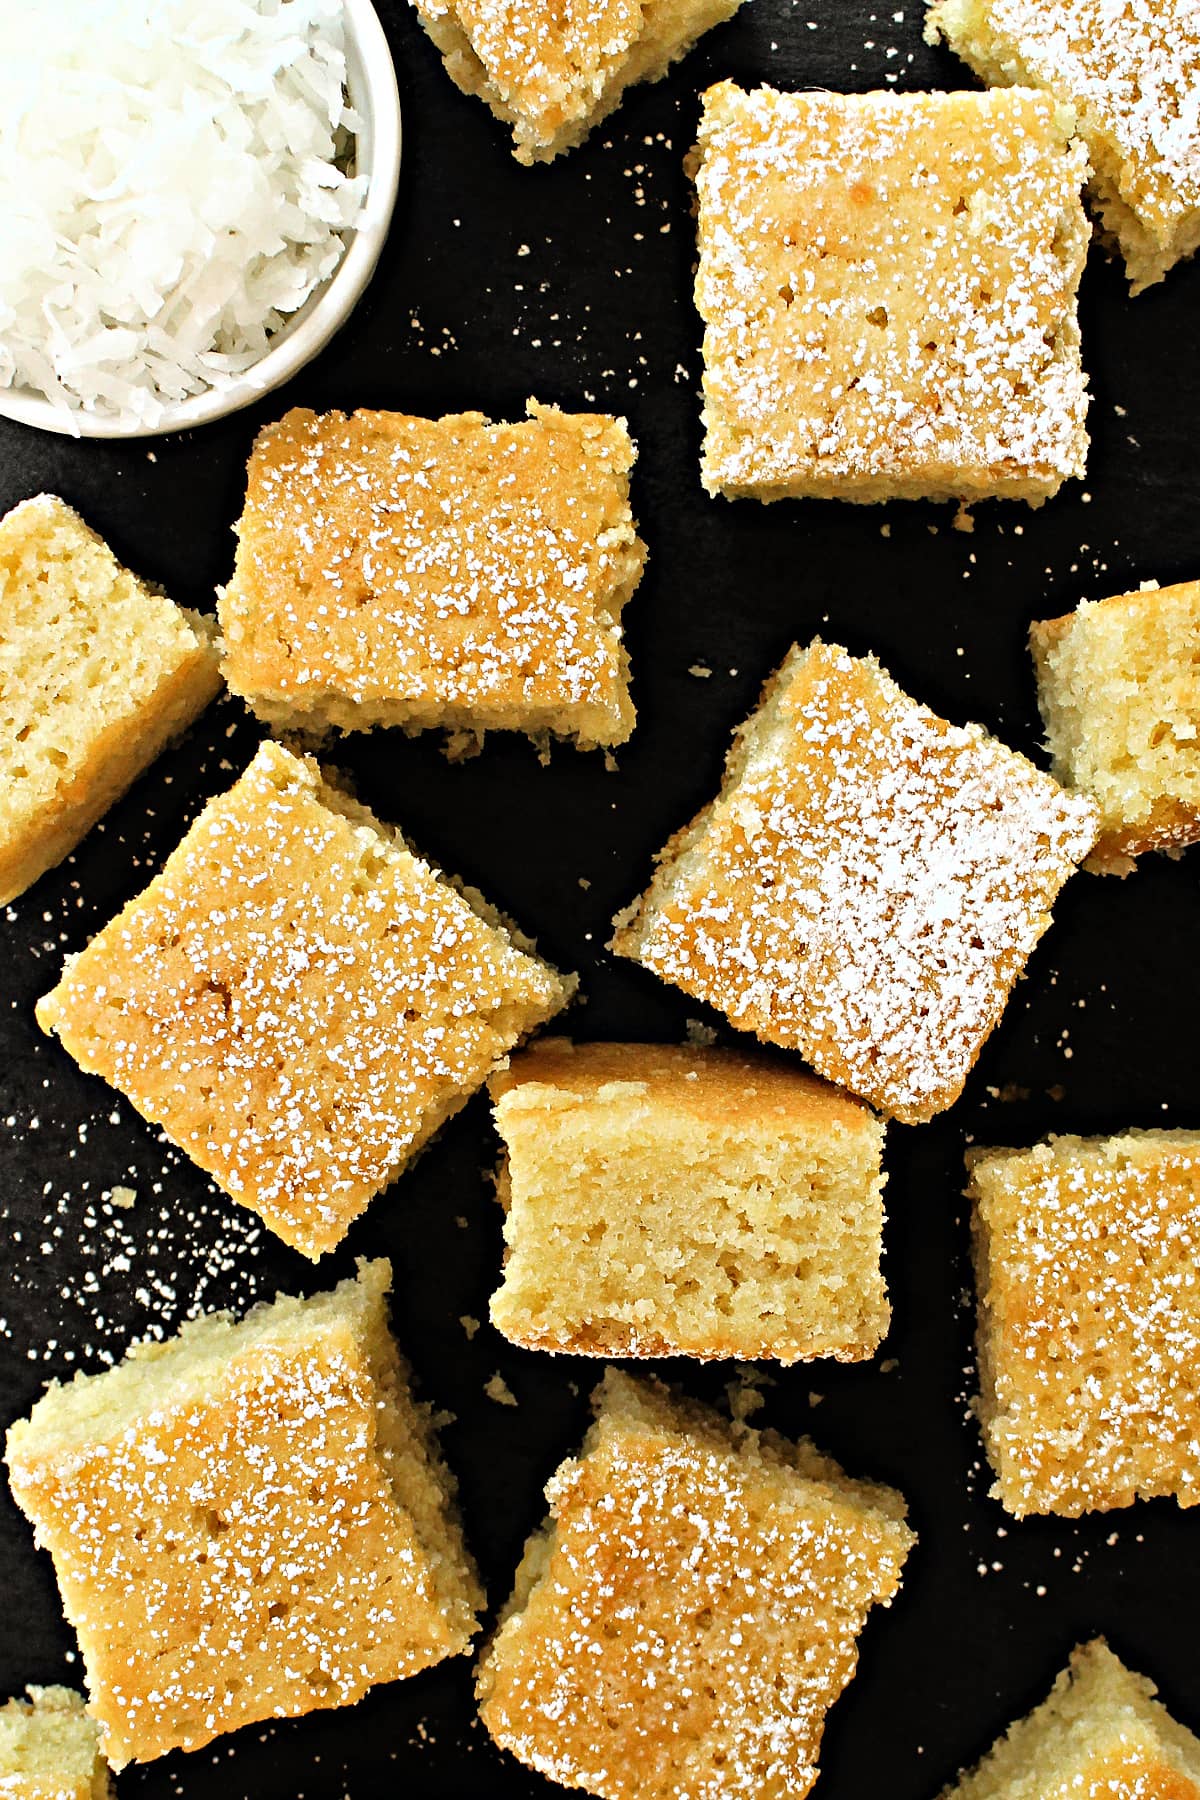 Coconut Milk Snack Cake cut into squares and topped with powdered sugar.